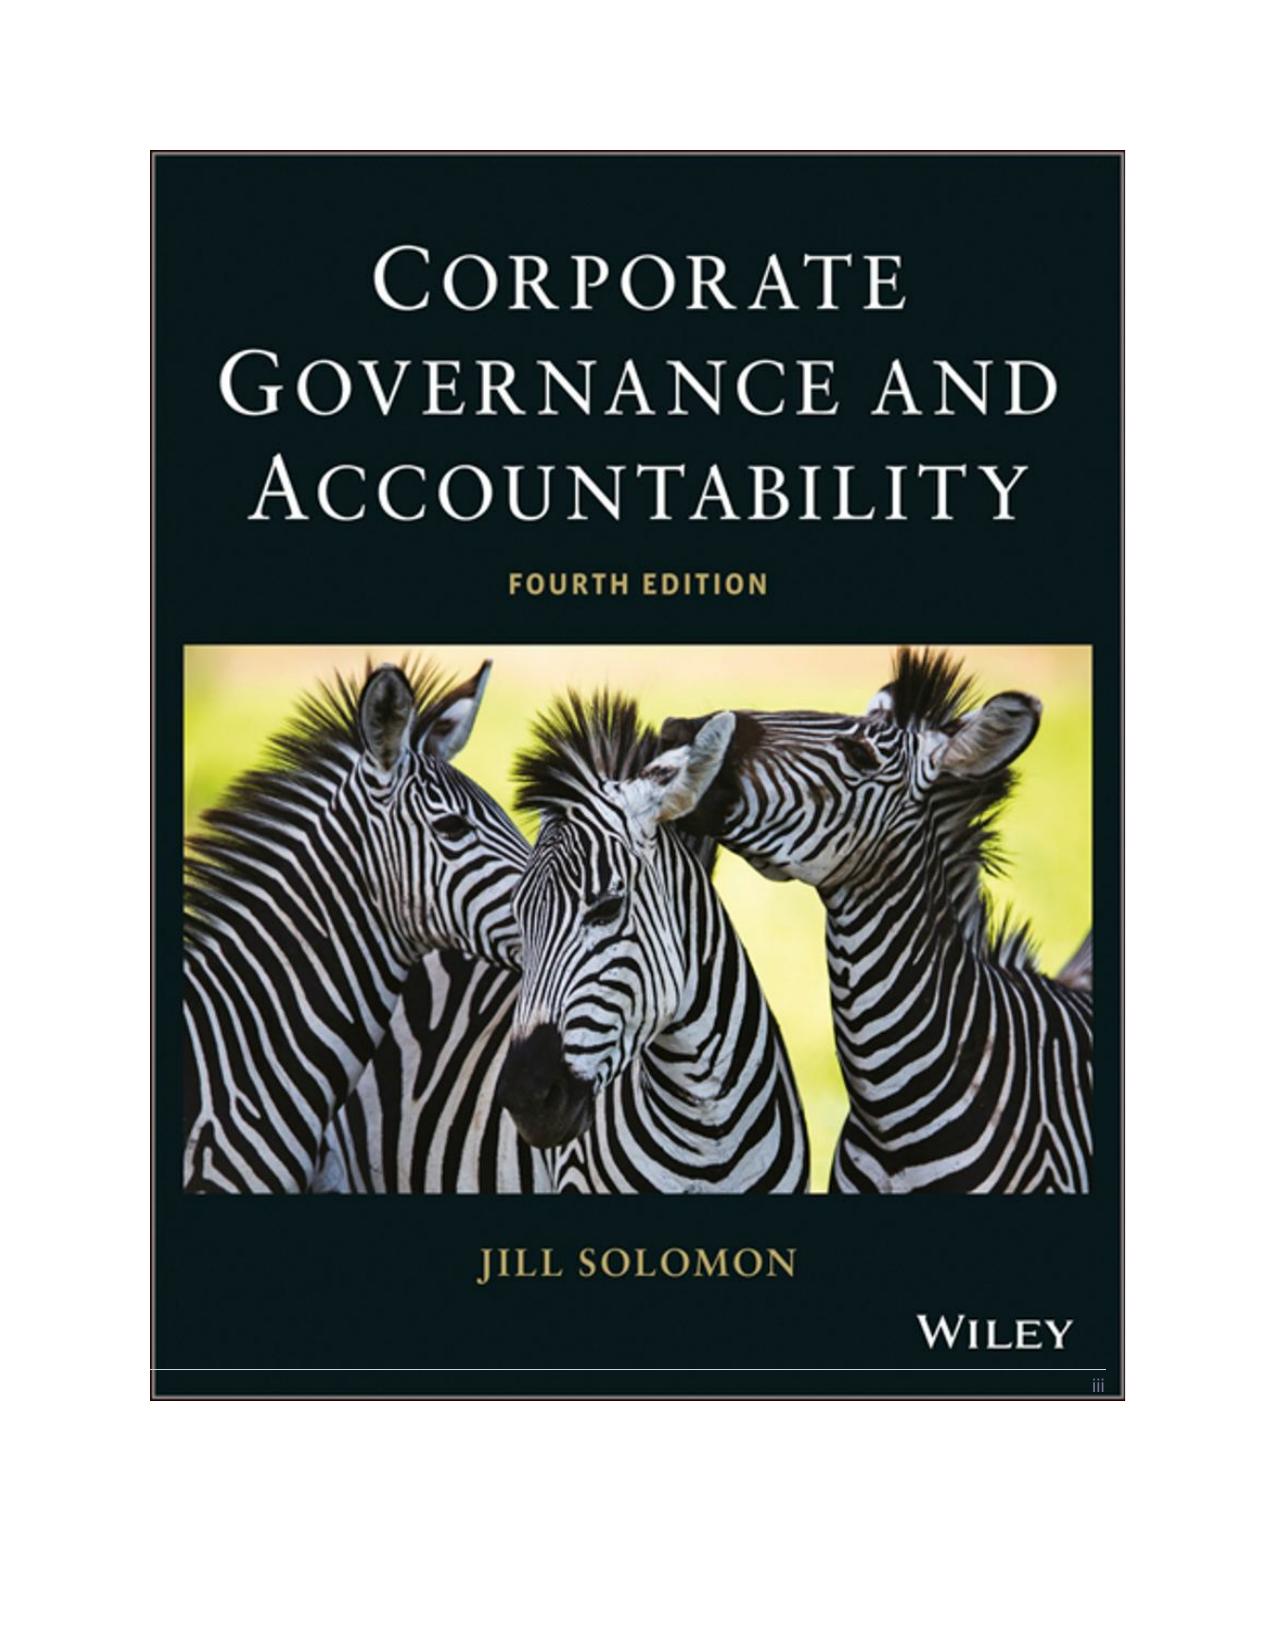 Corporate Governance and Accountability 4th ed - Vitalsource Download.jpg